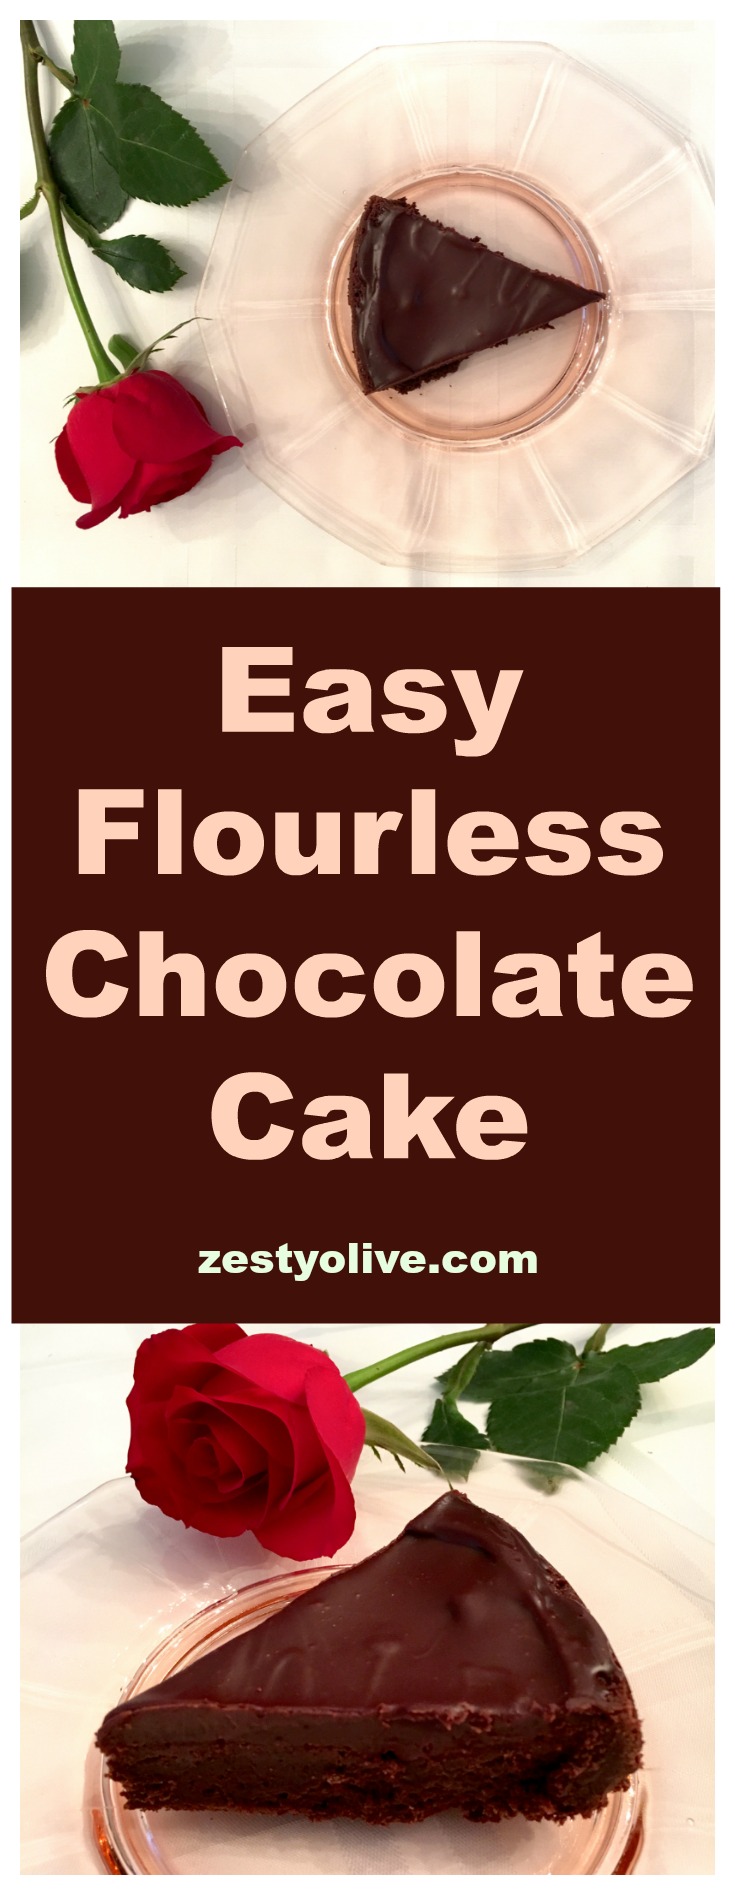 You can whip up this flourless chocolate cake with ganache glaze in one bowl ~ no need for a mixer! This cake is dense and rich - perfect for chocolate lovers. Bonus: it's easy!